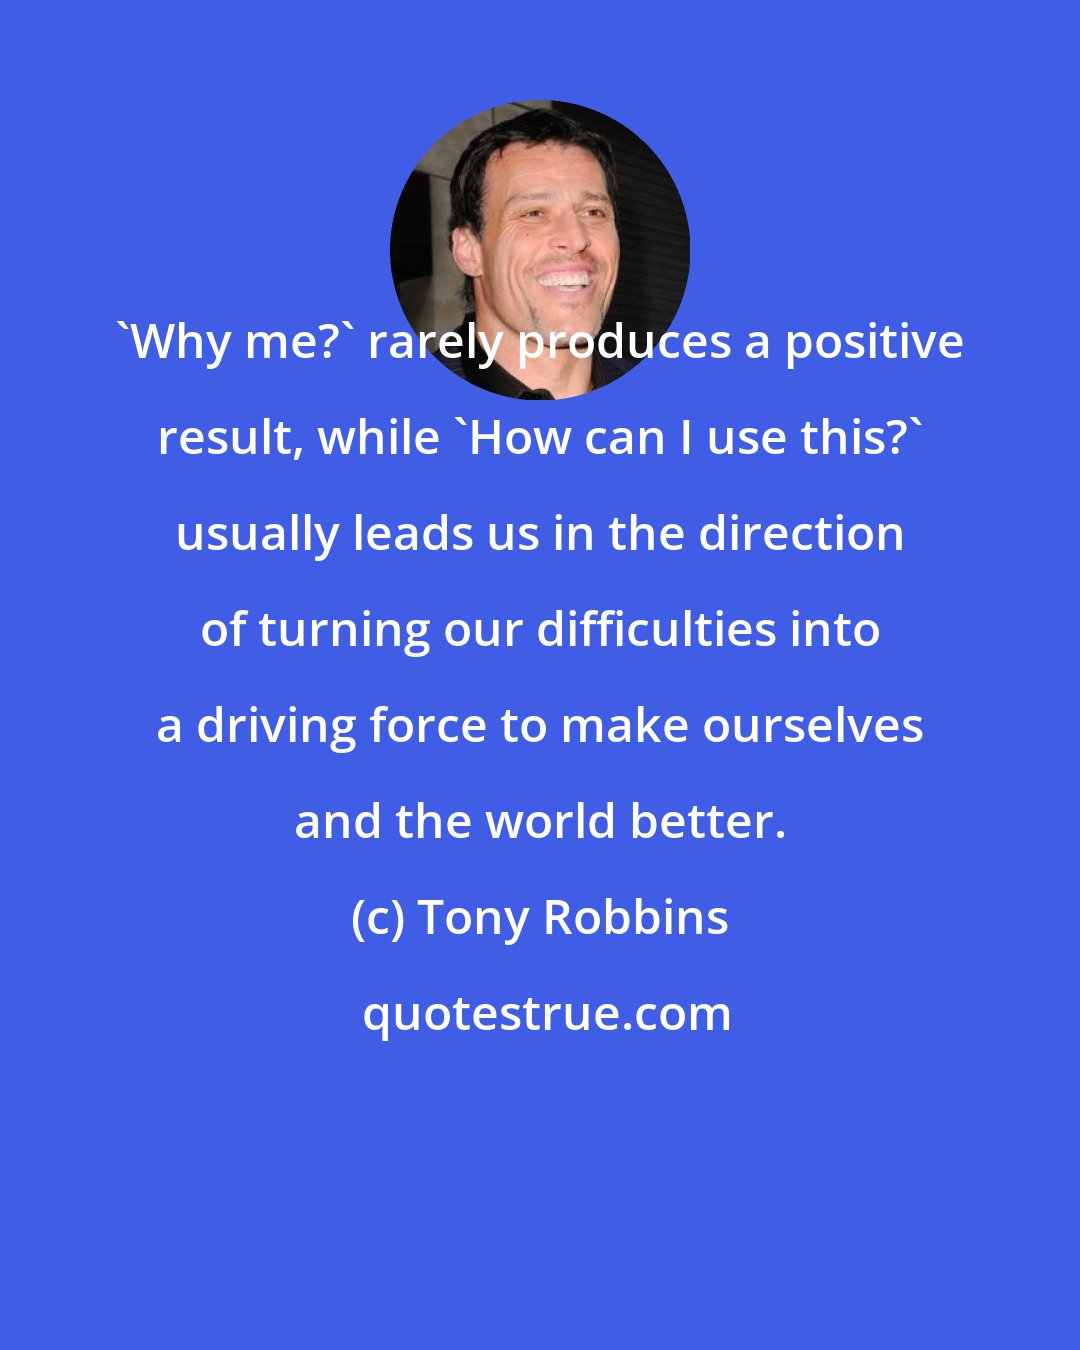 Tony Robbins: 'Why me?' rarely produces a positive result, while 'How can I use this?' usually leads us in the direction of turning our difficulties into a driving force to make ourselves and the world better.